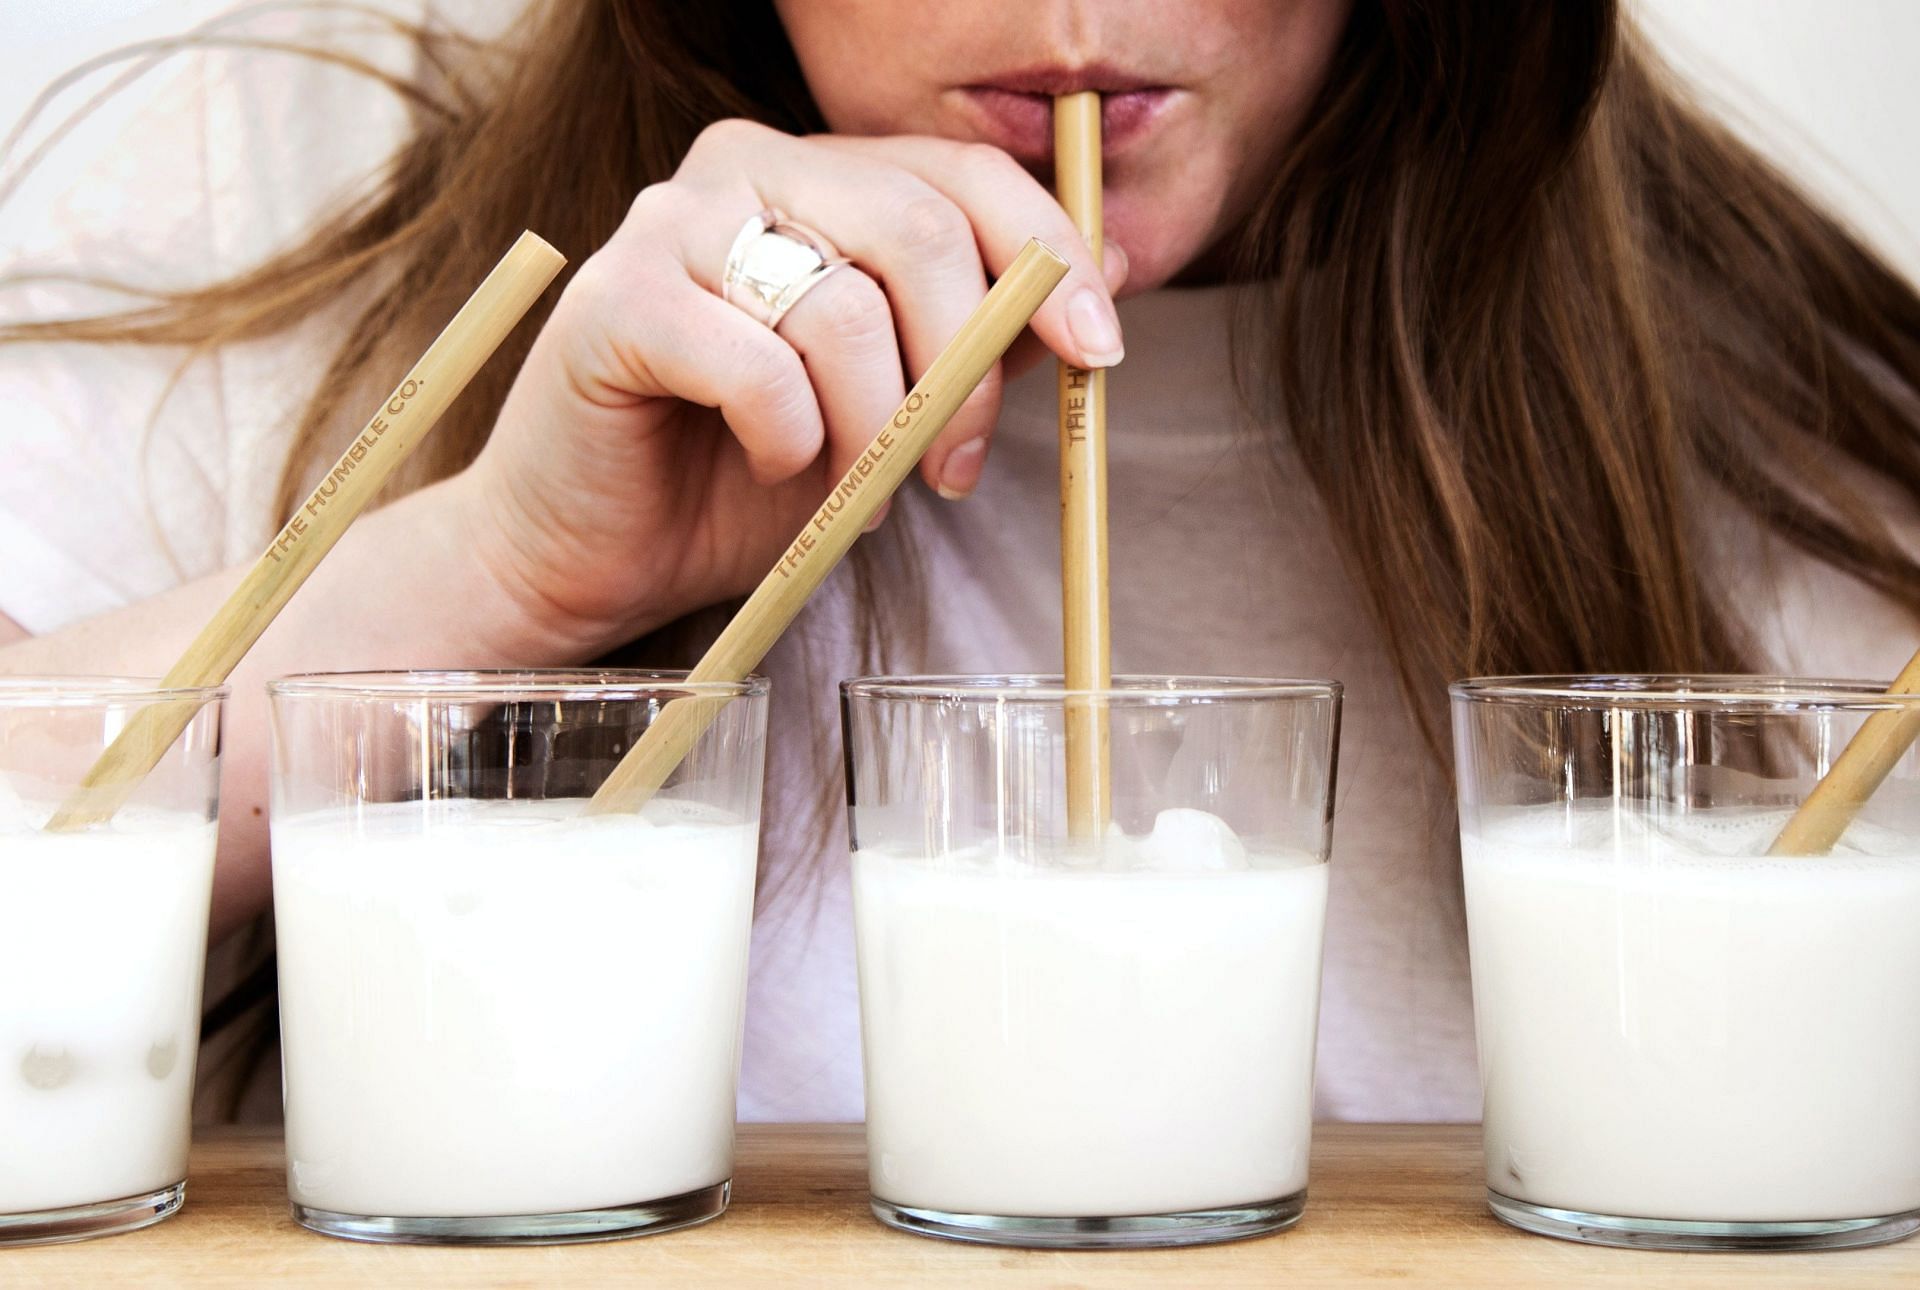 Kefir is a fermented milk drink that promotes digestion. (Image via Unsplash/The Humble Co.)